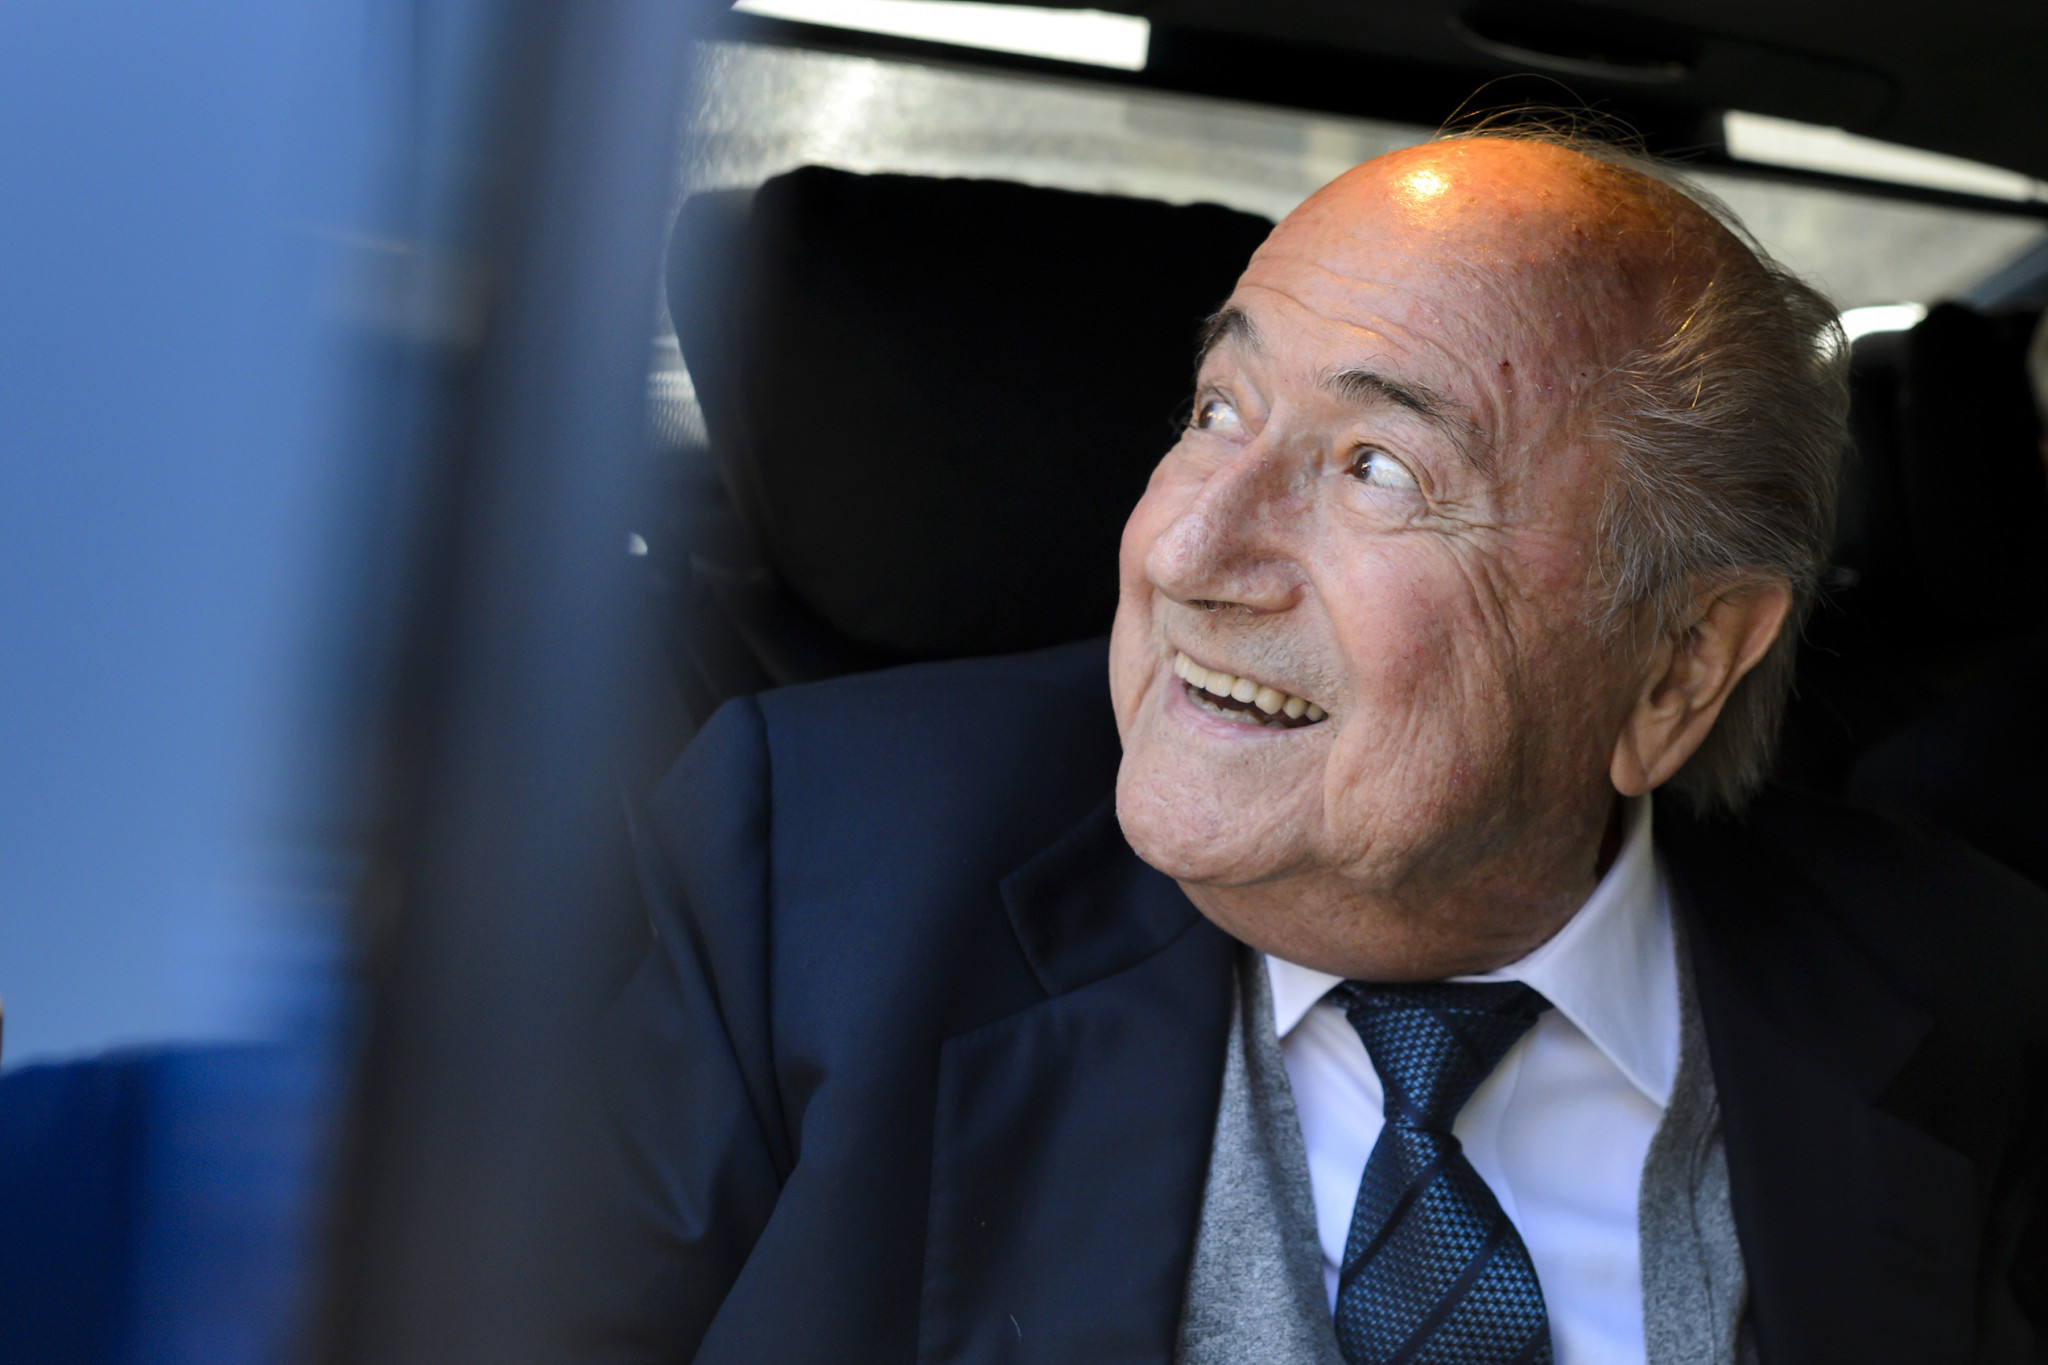 Blatter claims he has new evidence which could help challenge six-year FIFA ban